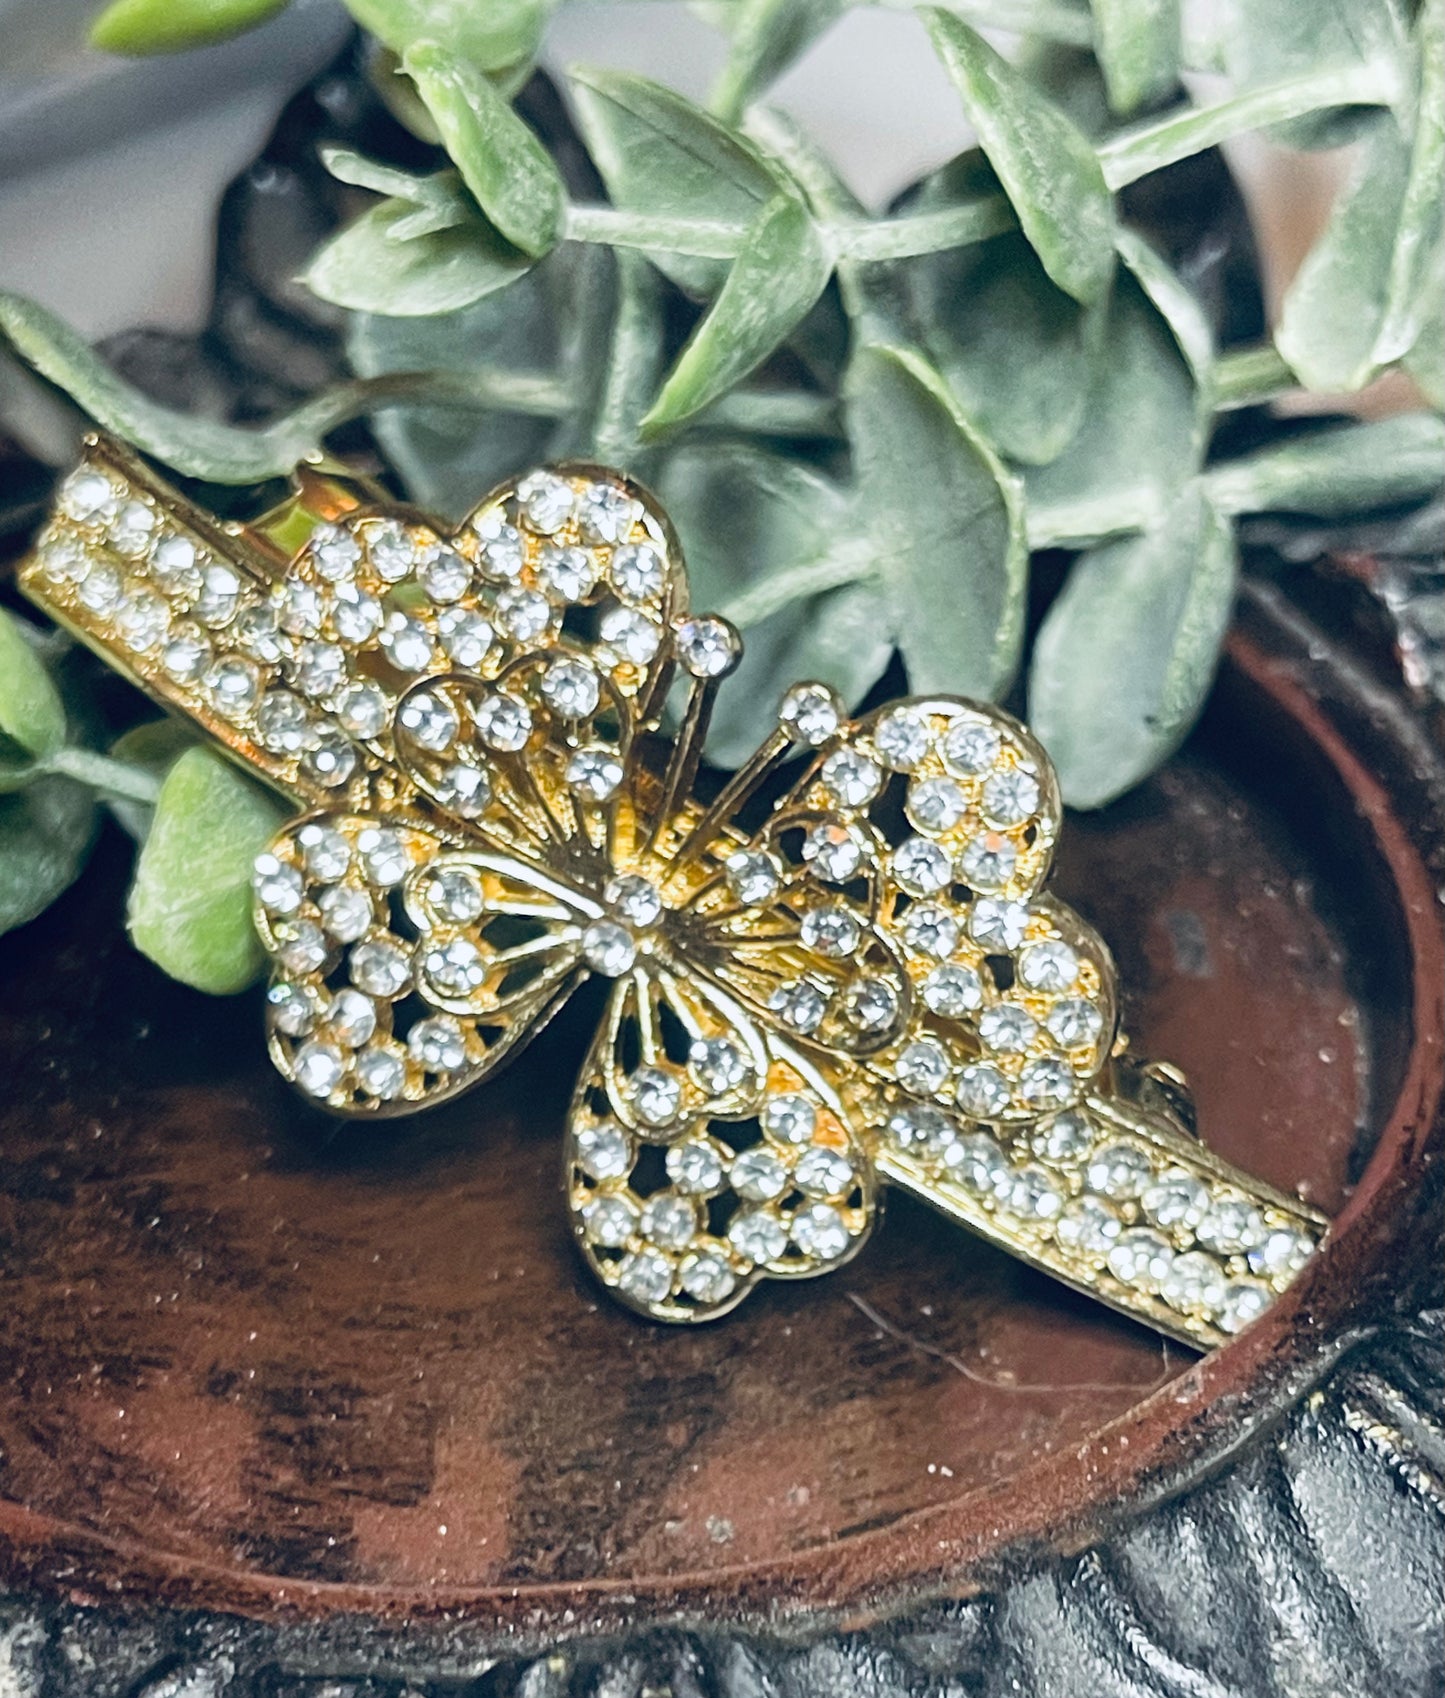 Clear Crystal butterfly rhinestone barrette approximately 3.0” gold tone formal hair accessories gift wedding bridesmaid prom birthday mother of bride groom